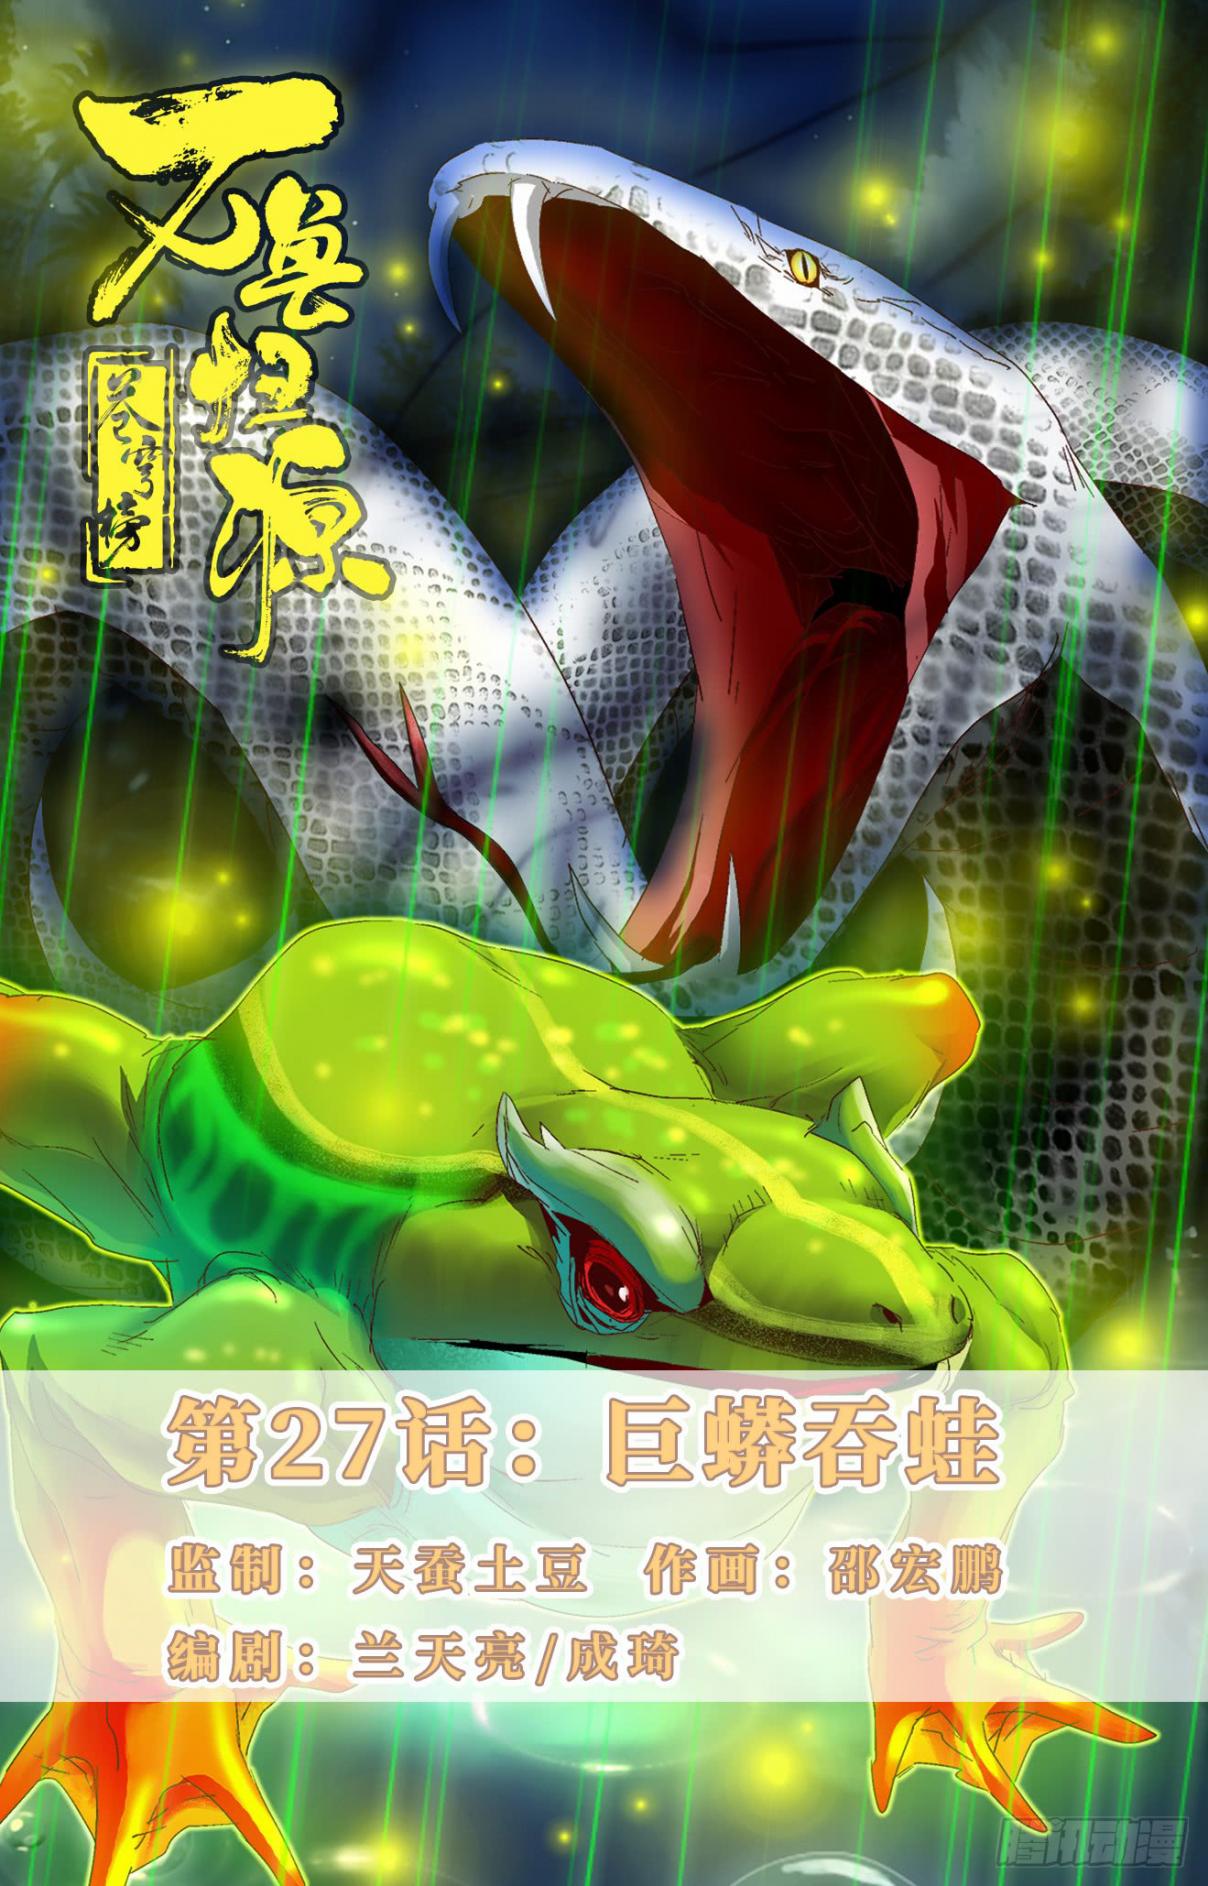 Fights Break Sphere – Return of the Beasts Ch. 27 Python Eating the Frog